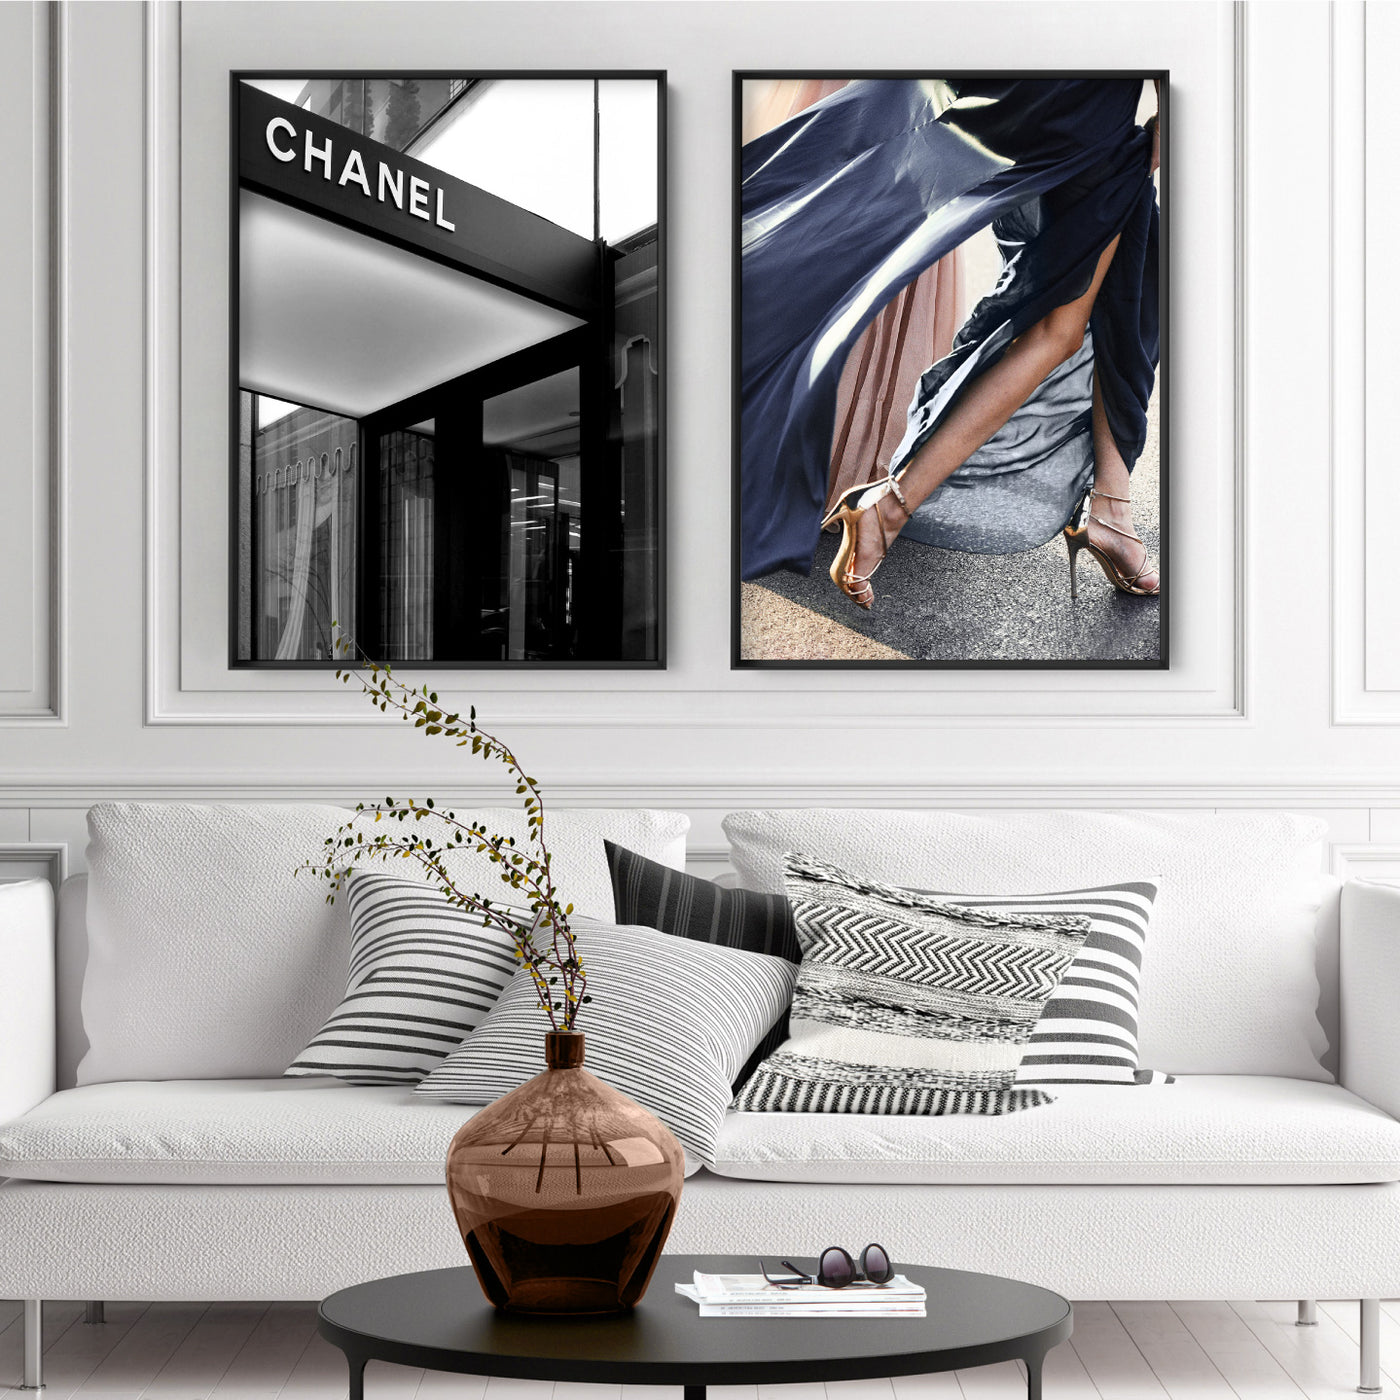 Semaine De La Mode III - Art Print, Poster, Stretched Canvas or Framed Wall Art, shown framed in a home interior space